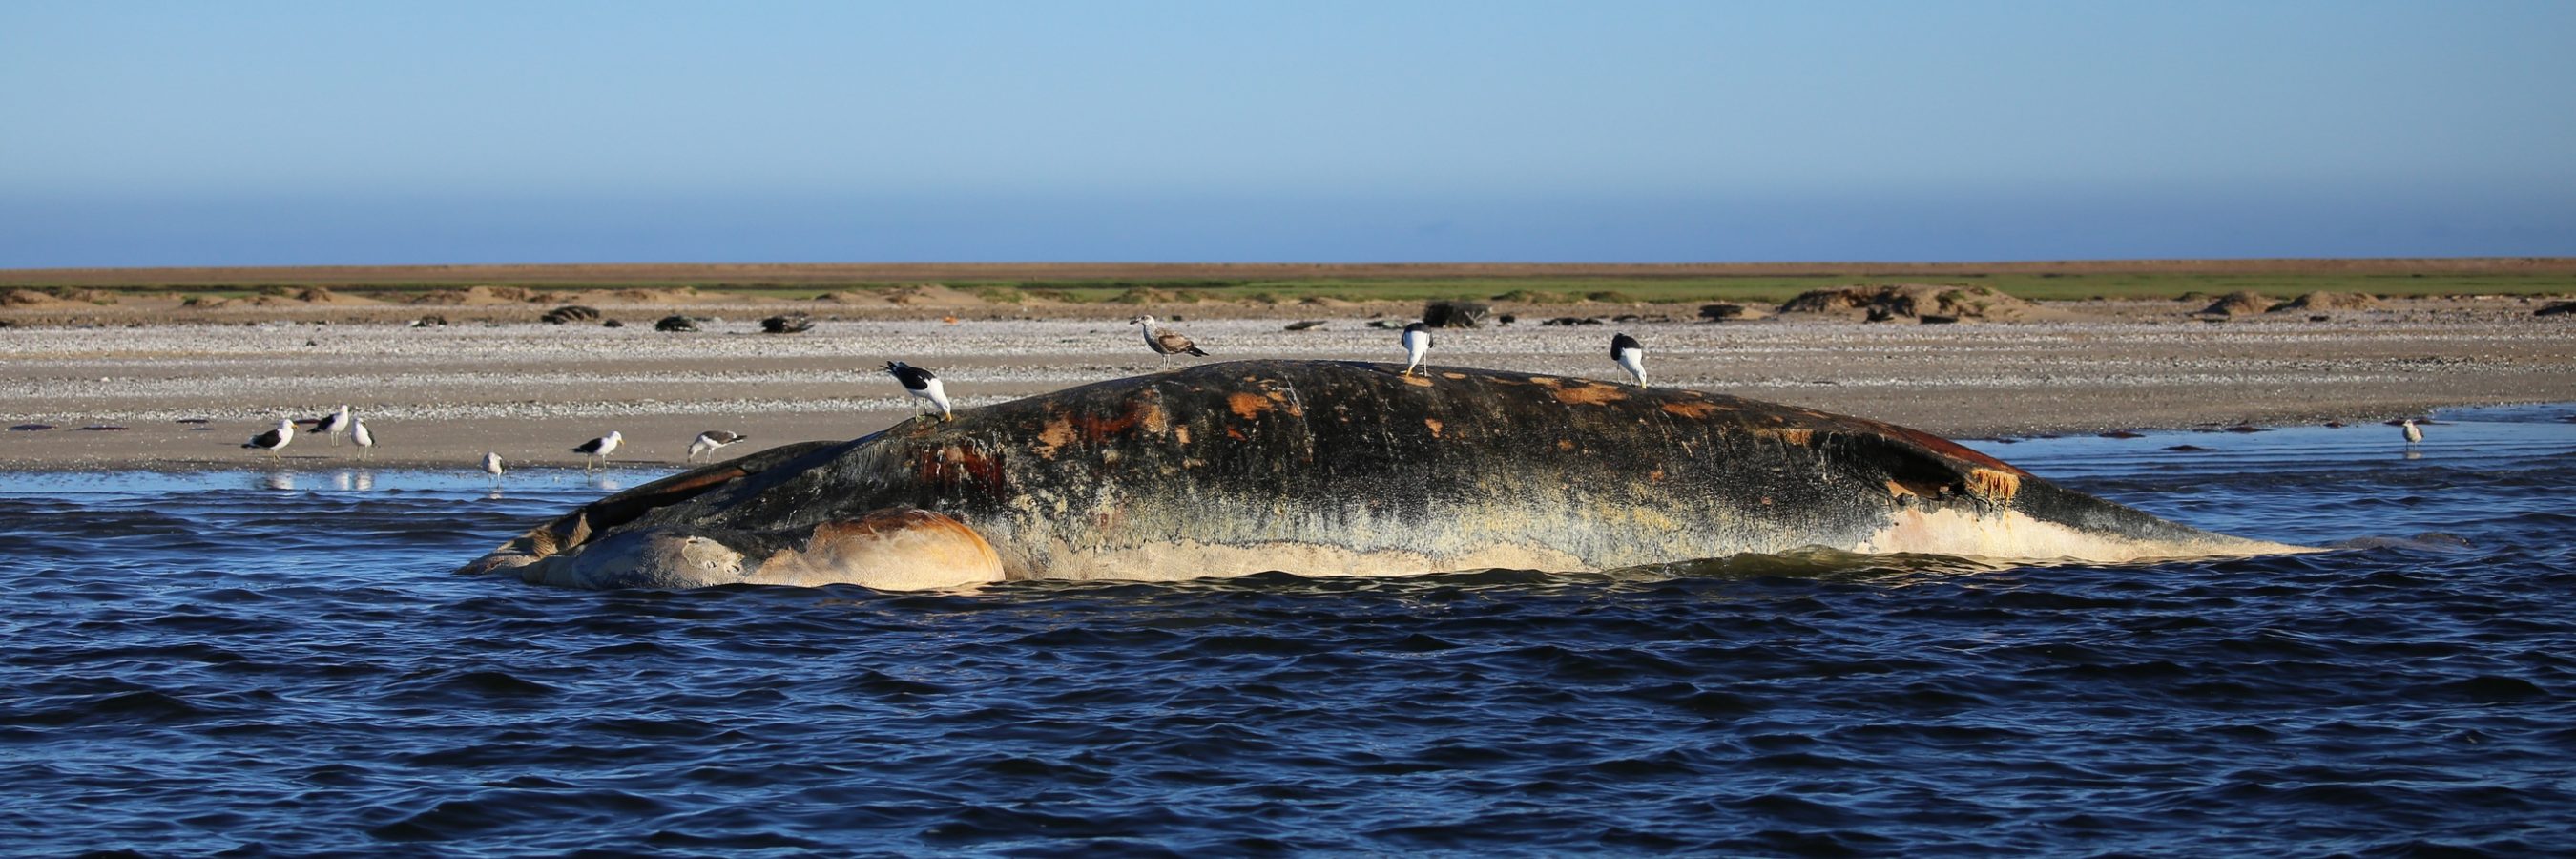 One of the dead humpback whales. Its grace dissolved by decay, but this type of stranding represents a gold mine of potential information about all the factors surrounding the animal. Photographer: Simon Elwen